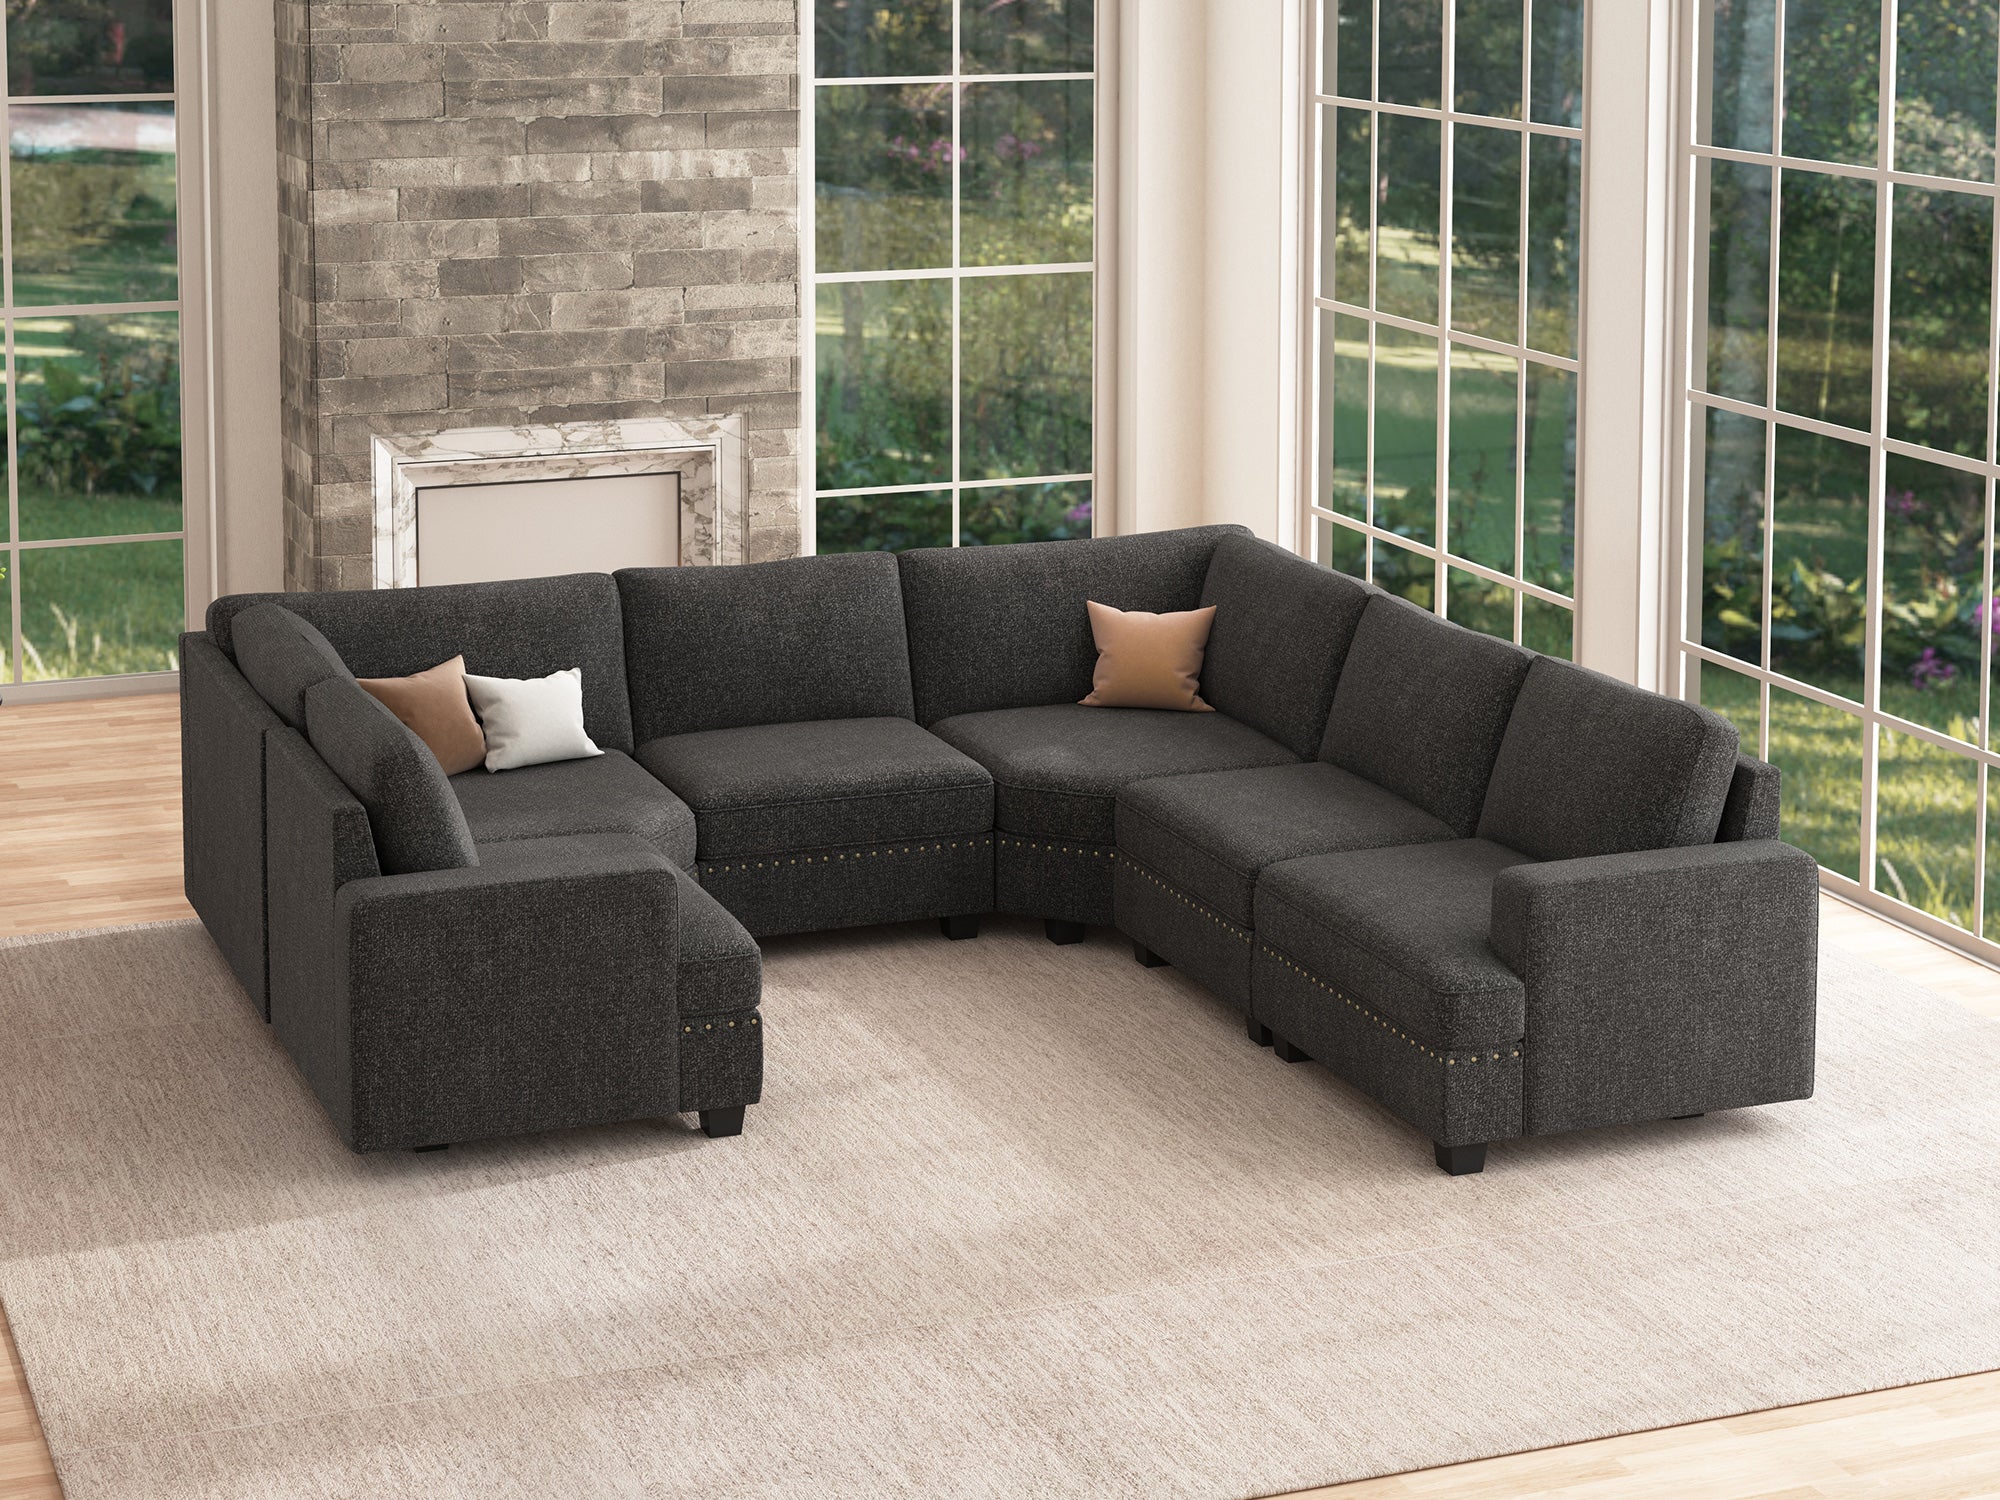 HONBAY 6-Seat U Shaped Corner Modular Sofa Oversized Sectional Sofa Couch for Living Room #Color_Dark Grey